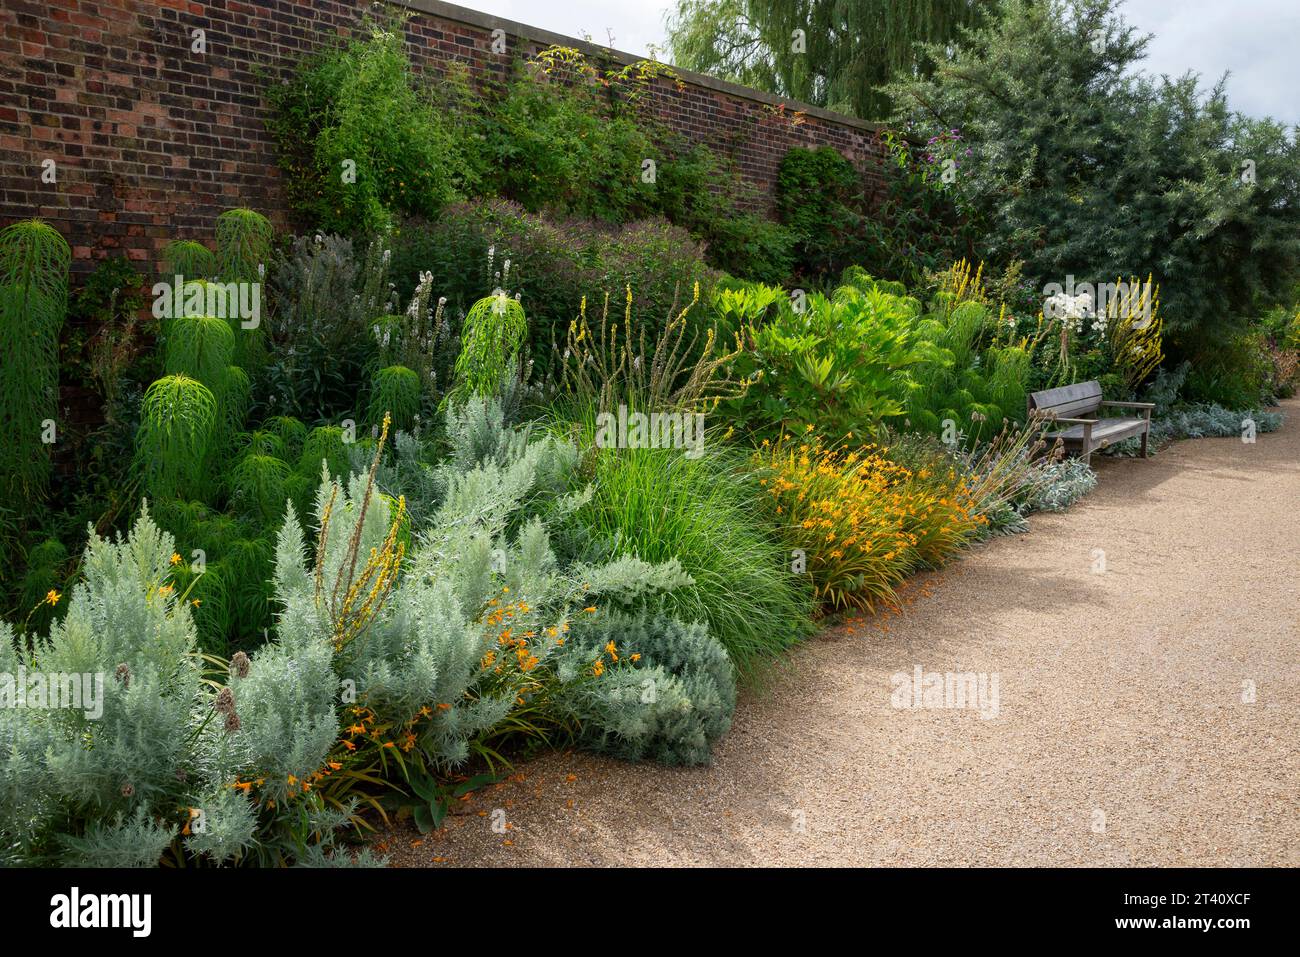 Mixed border in the walled garden at RHS Bridgewater, Worsley, Manchester, England. Stock Photo